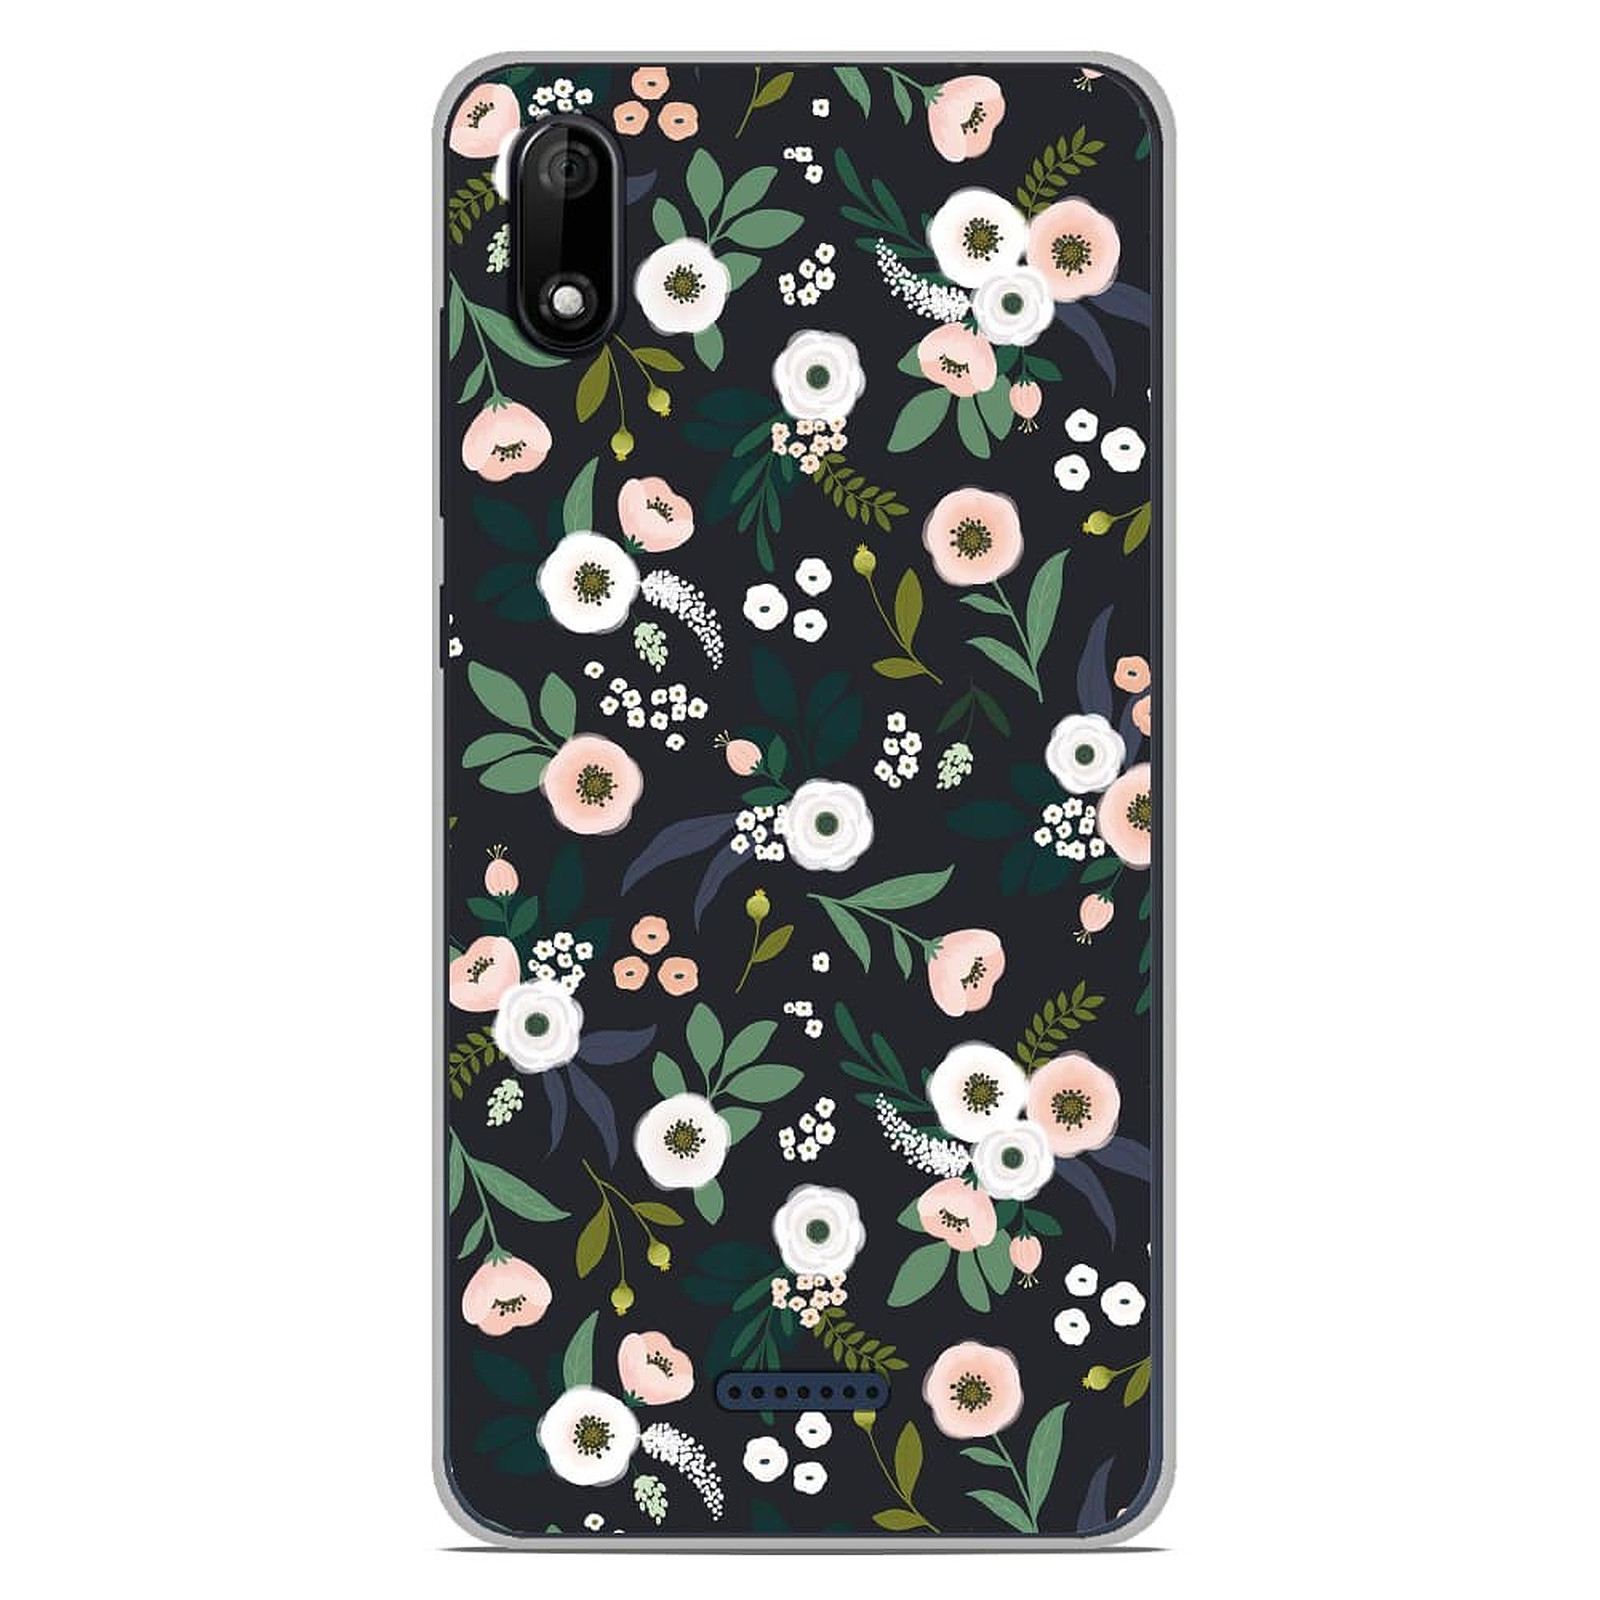 1001 Coques Coque silicone gel Wiko Y80 motif Flowers Noir - Coque telephone 1001Coques